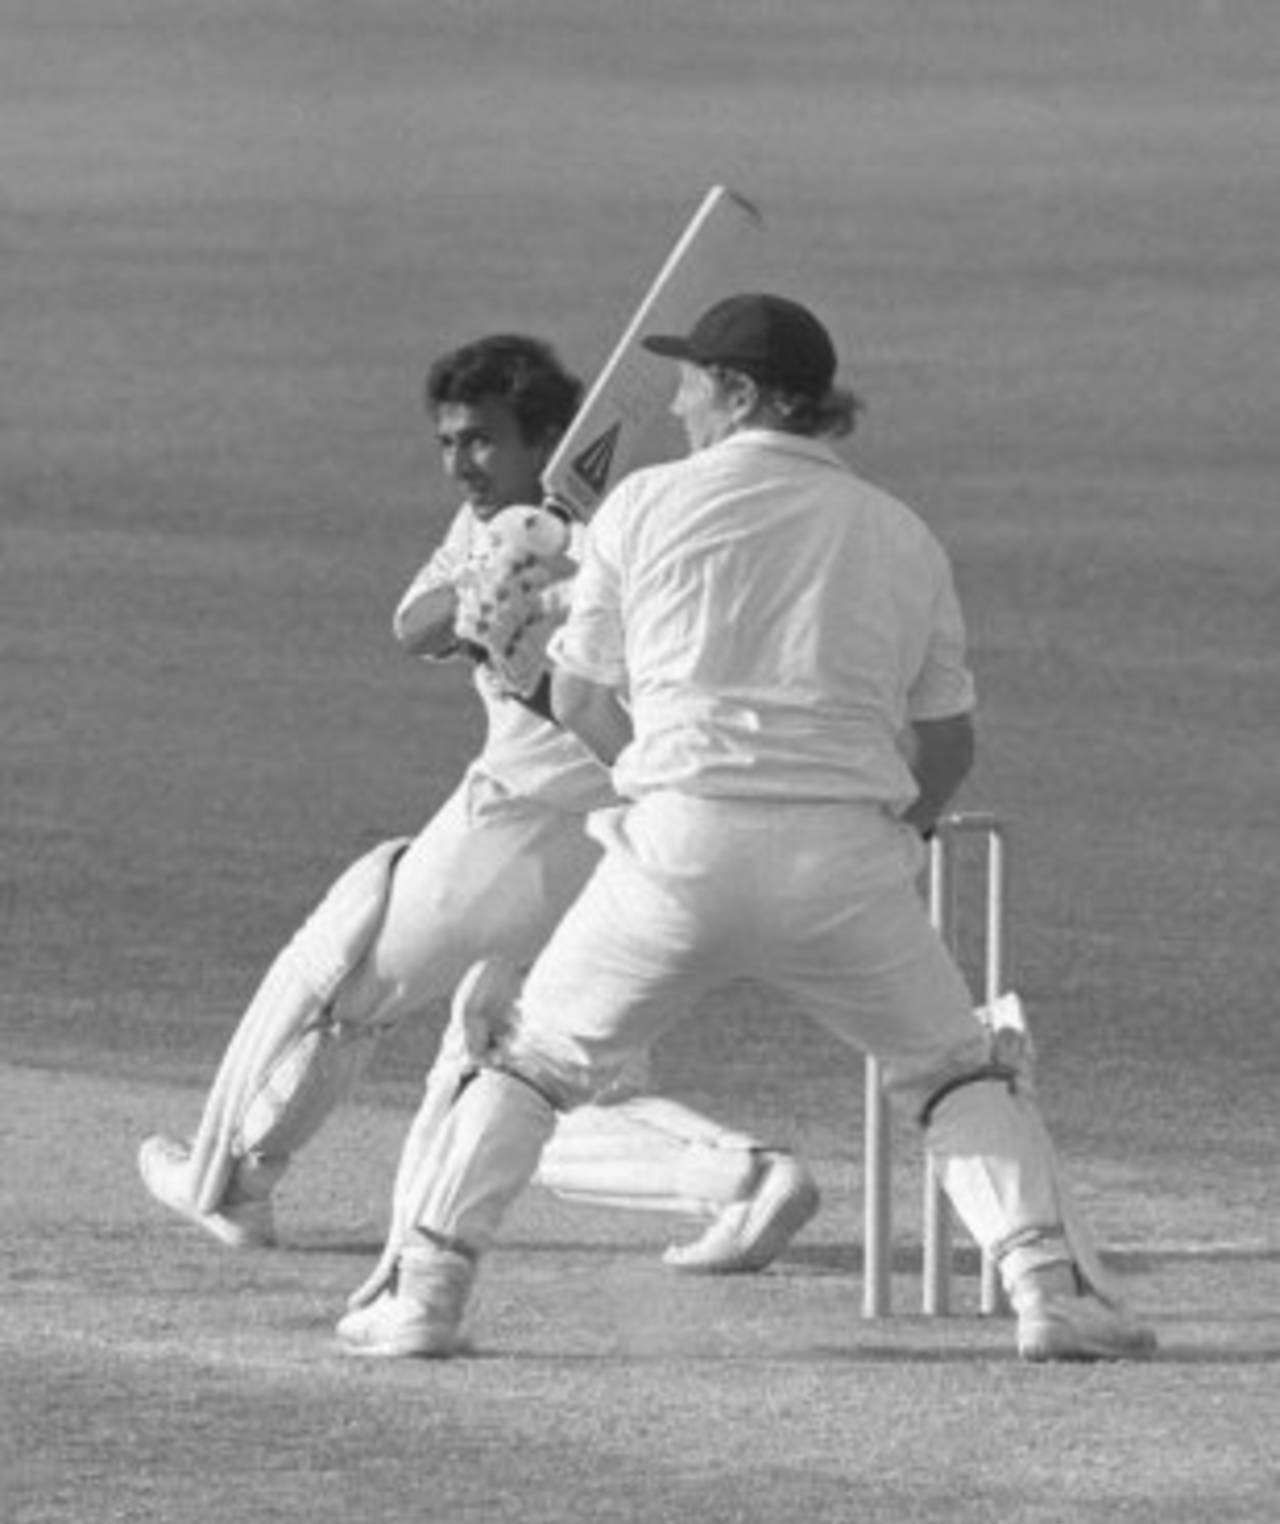 Sunil Gavaskar pulls one to the leg side during his double-century, England v India, 4th Test, The Oval, 4th day, 3 September, 1979